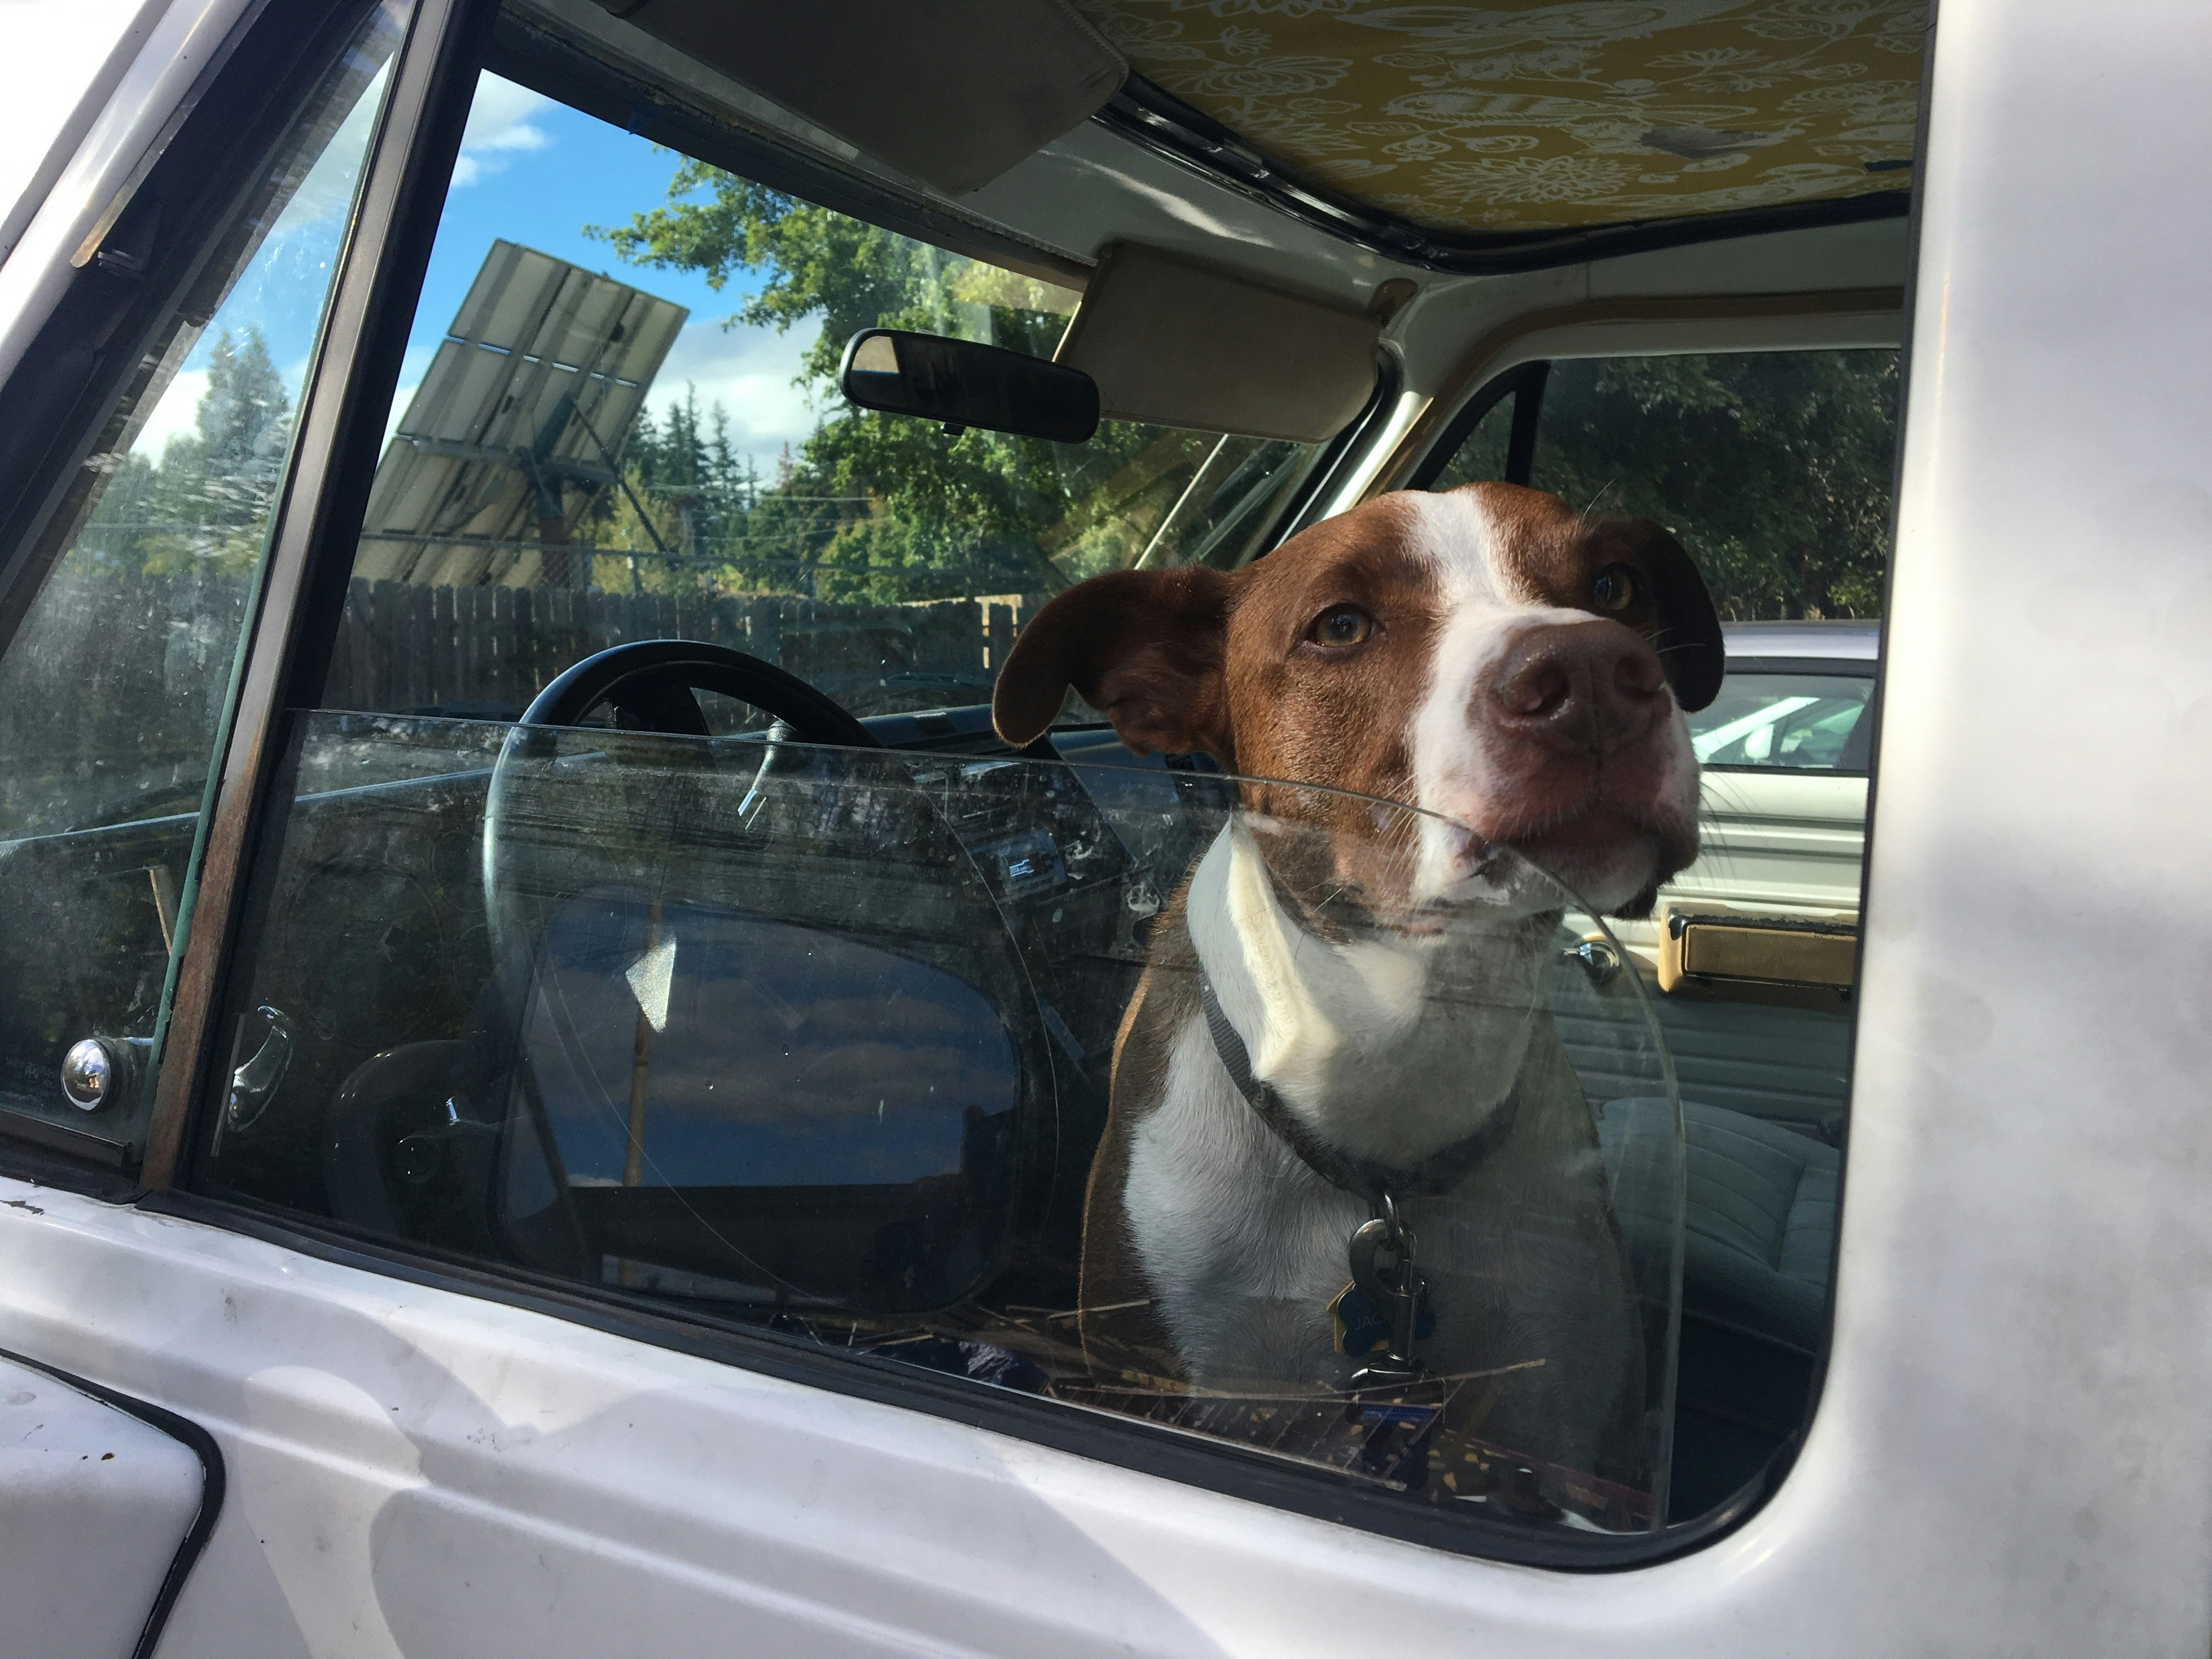 A brown and white dog with a leash clipped to his collar peers out the window of a white van outfitted for camping. In the background, two sedan cars are parked, and a solar panel sits behind a chainlink fence.